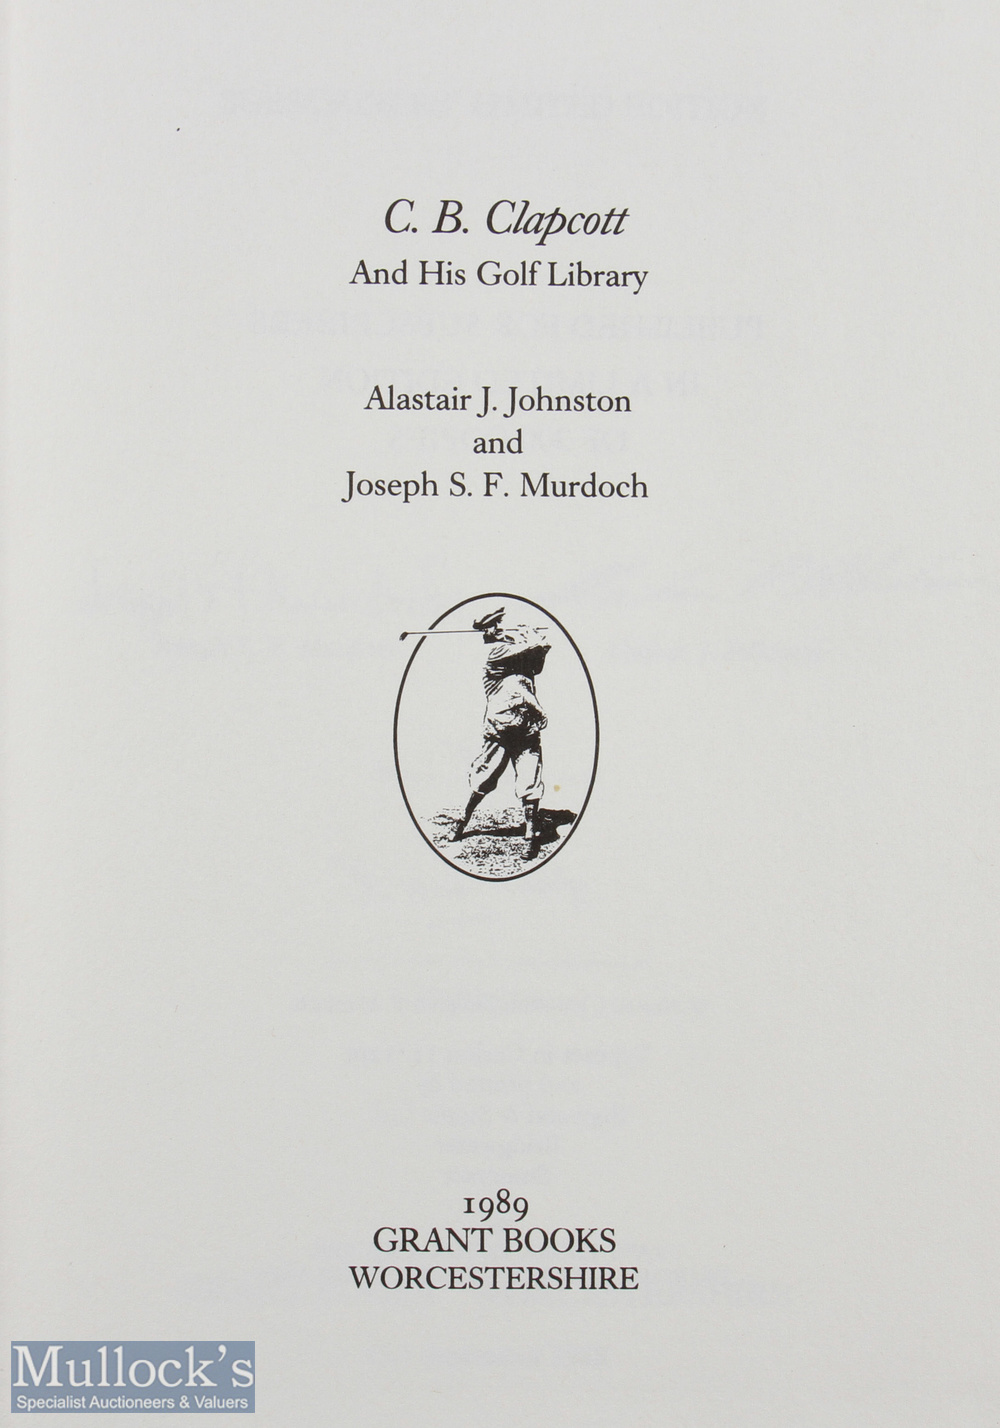 Johnston, Alistair J and Murdoch, Joseph S F signed - "C B Clapcott and His Golf Library" - Image 2 of 2